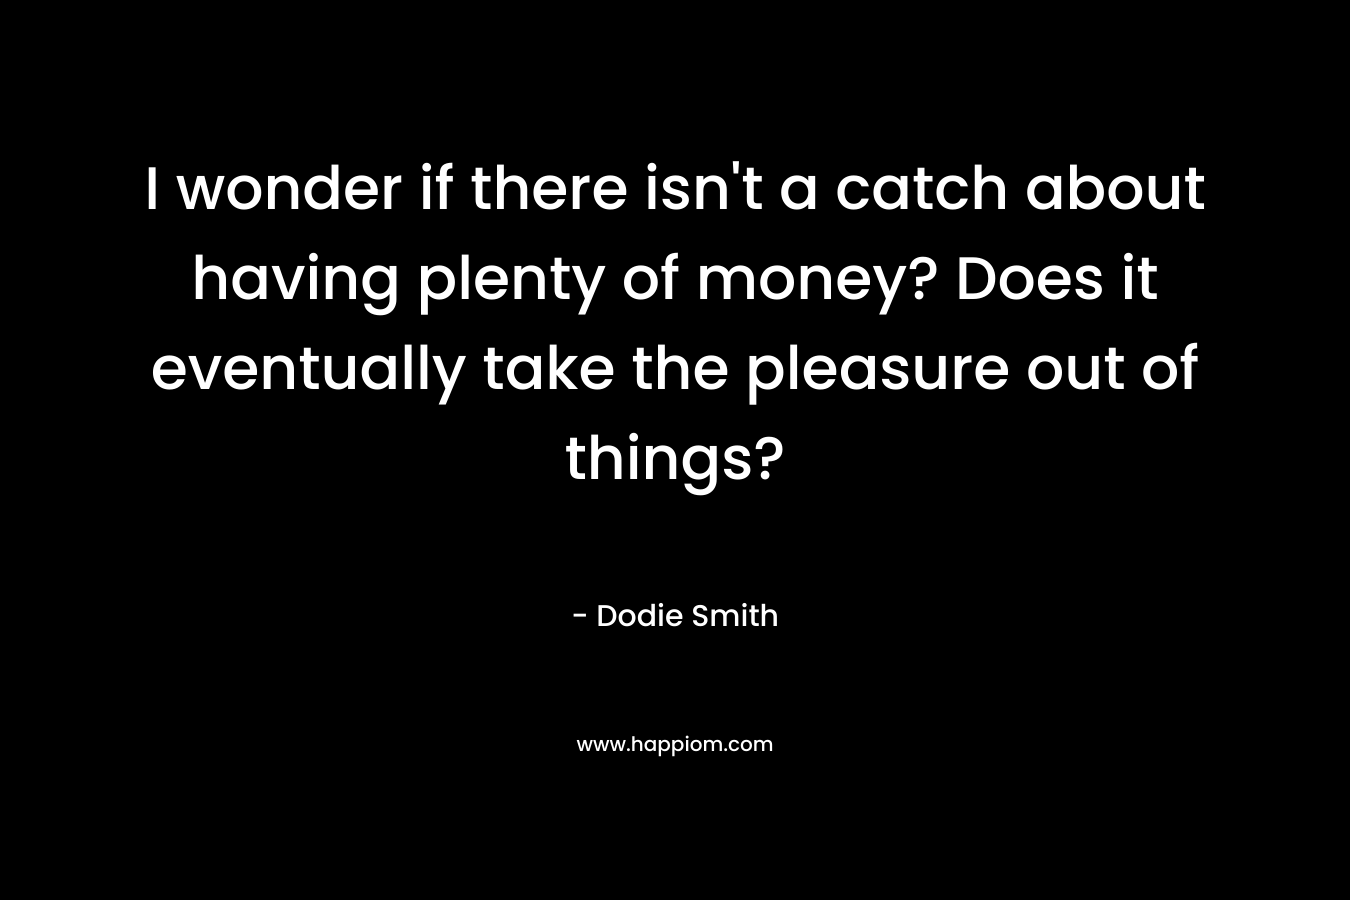 I wonder if there isn’t a catch about having plenty of money? Does it eventually take the pleasure out of things? – Dodie Smith